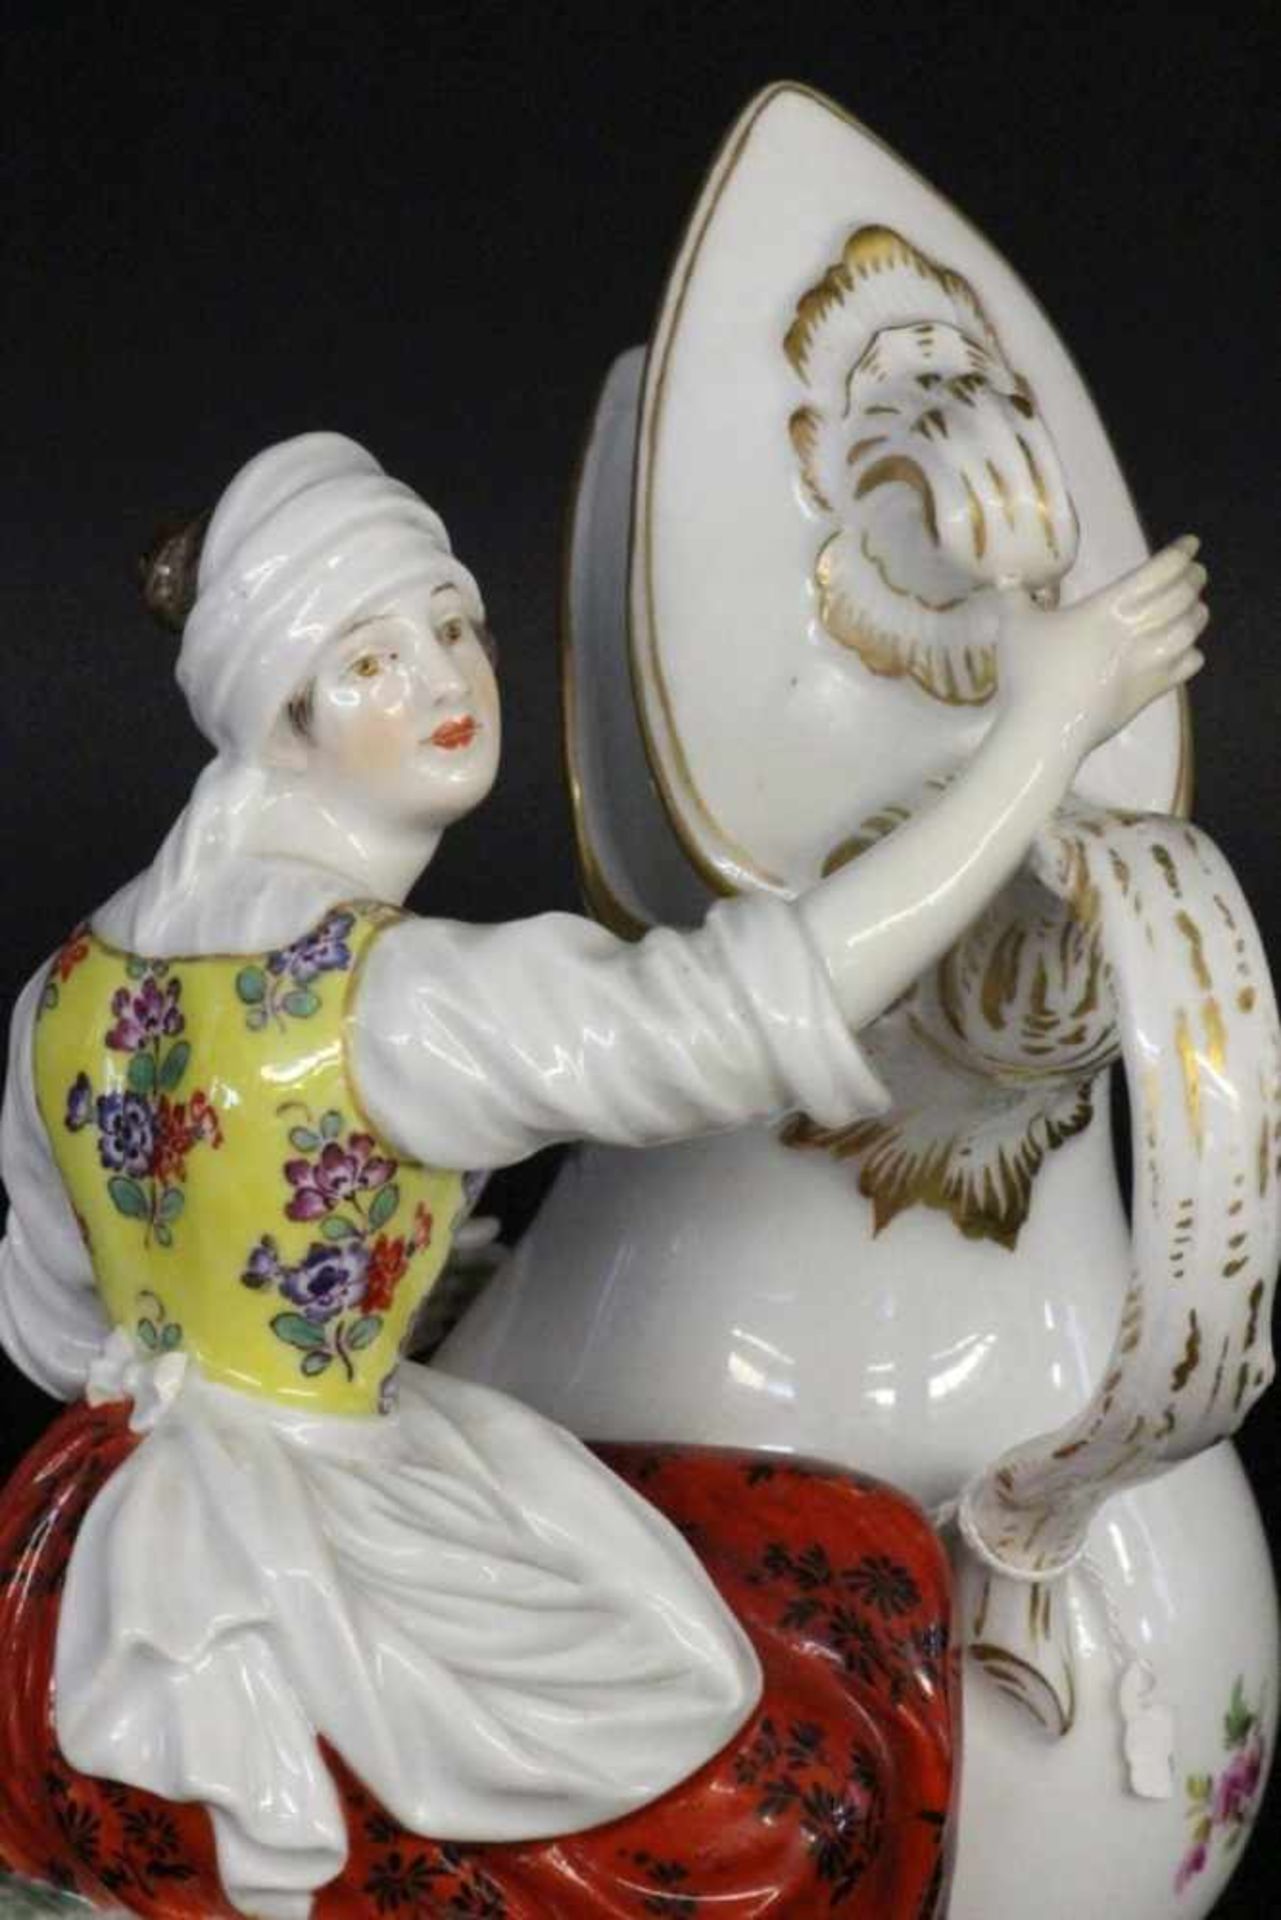 WOMAN WITH JUG Meissen 1860 - 1924 Polychrome decorated group of figures. Design by Johann